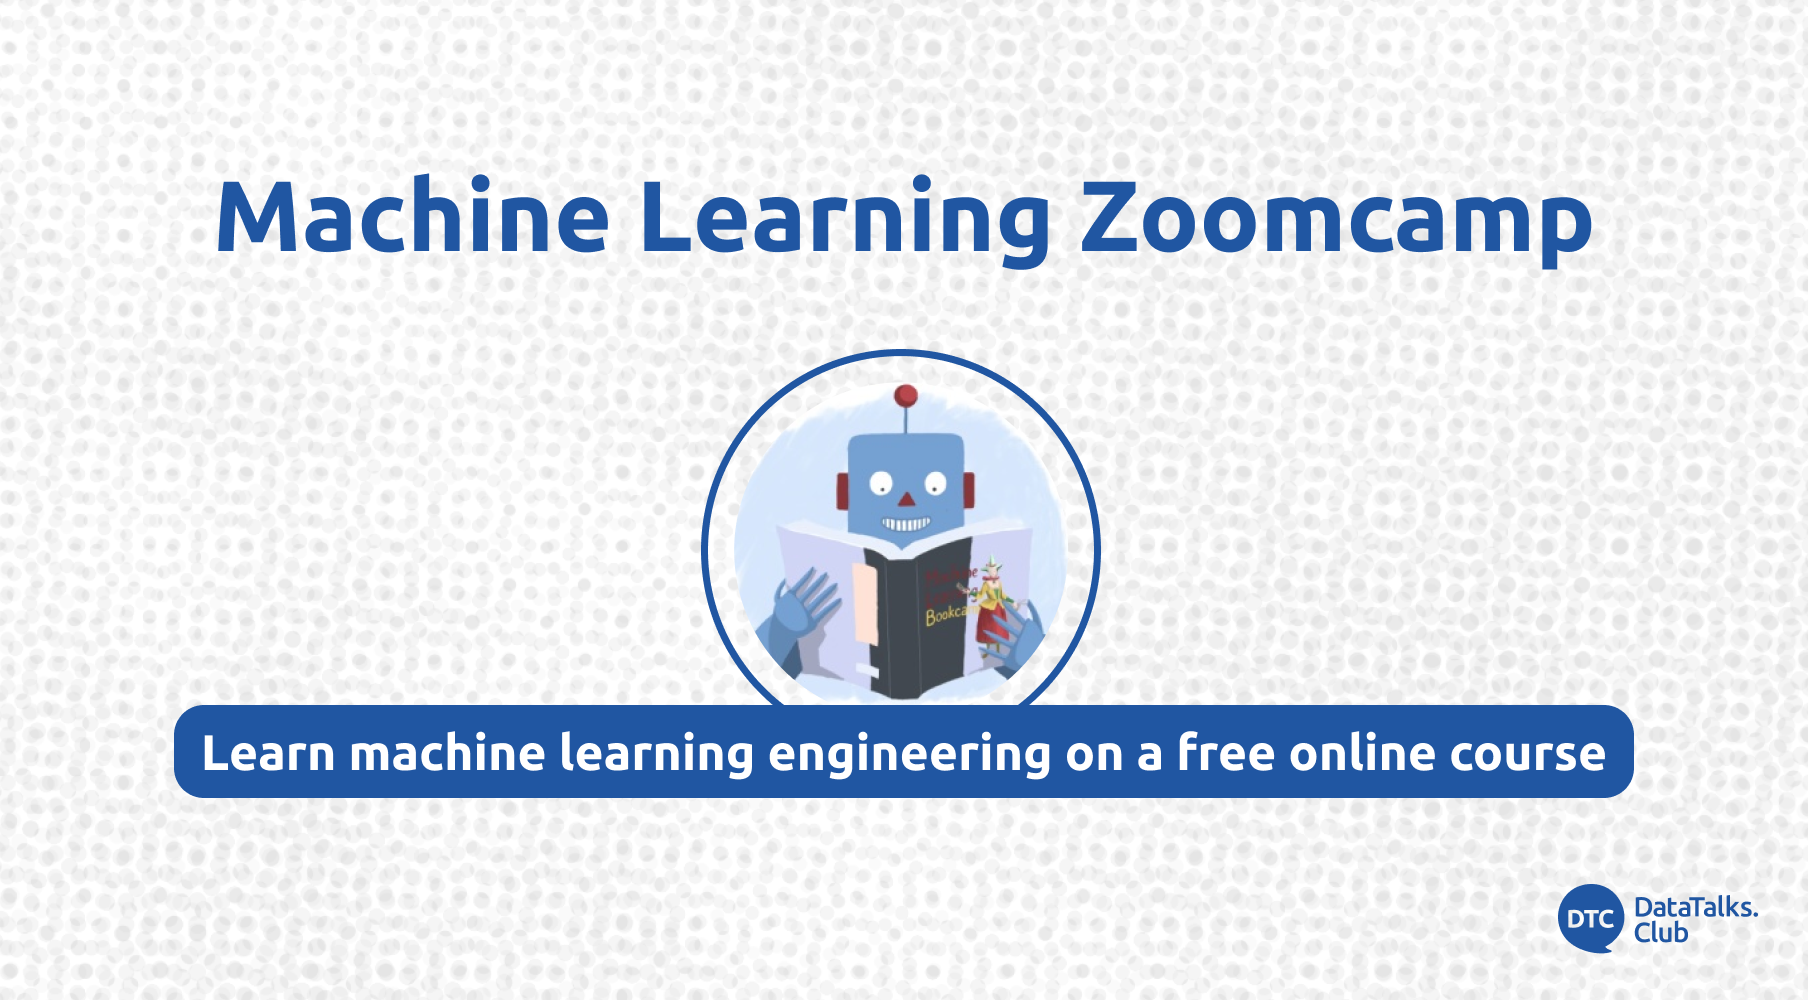 Learn Machine Learning Engineering on a free course